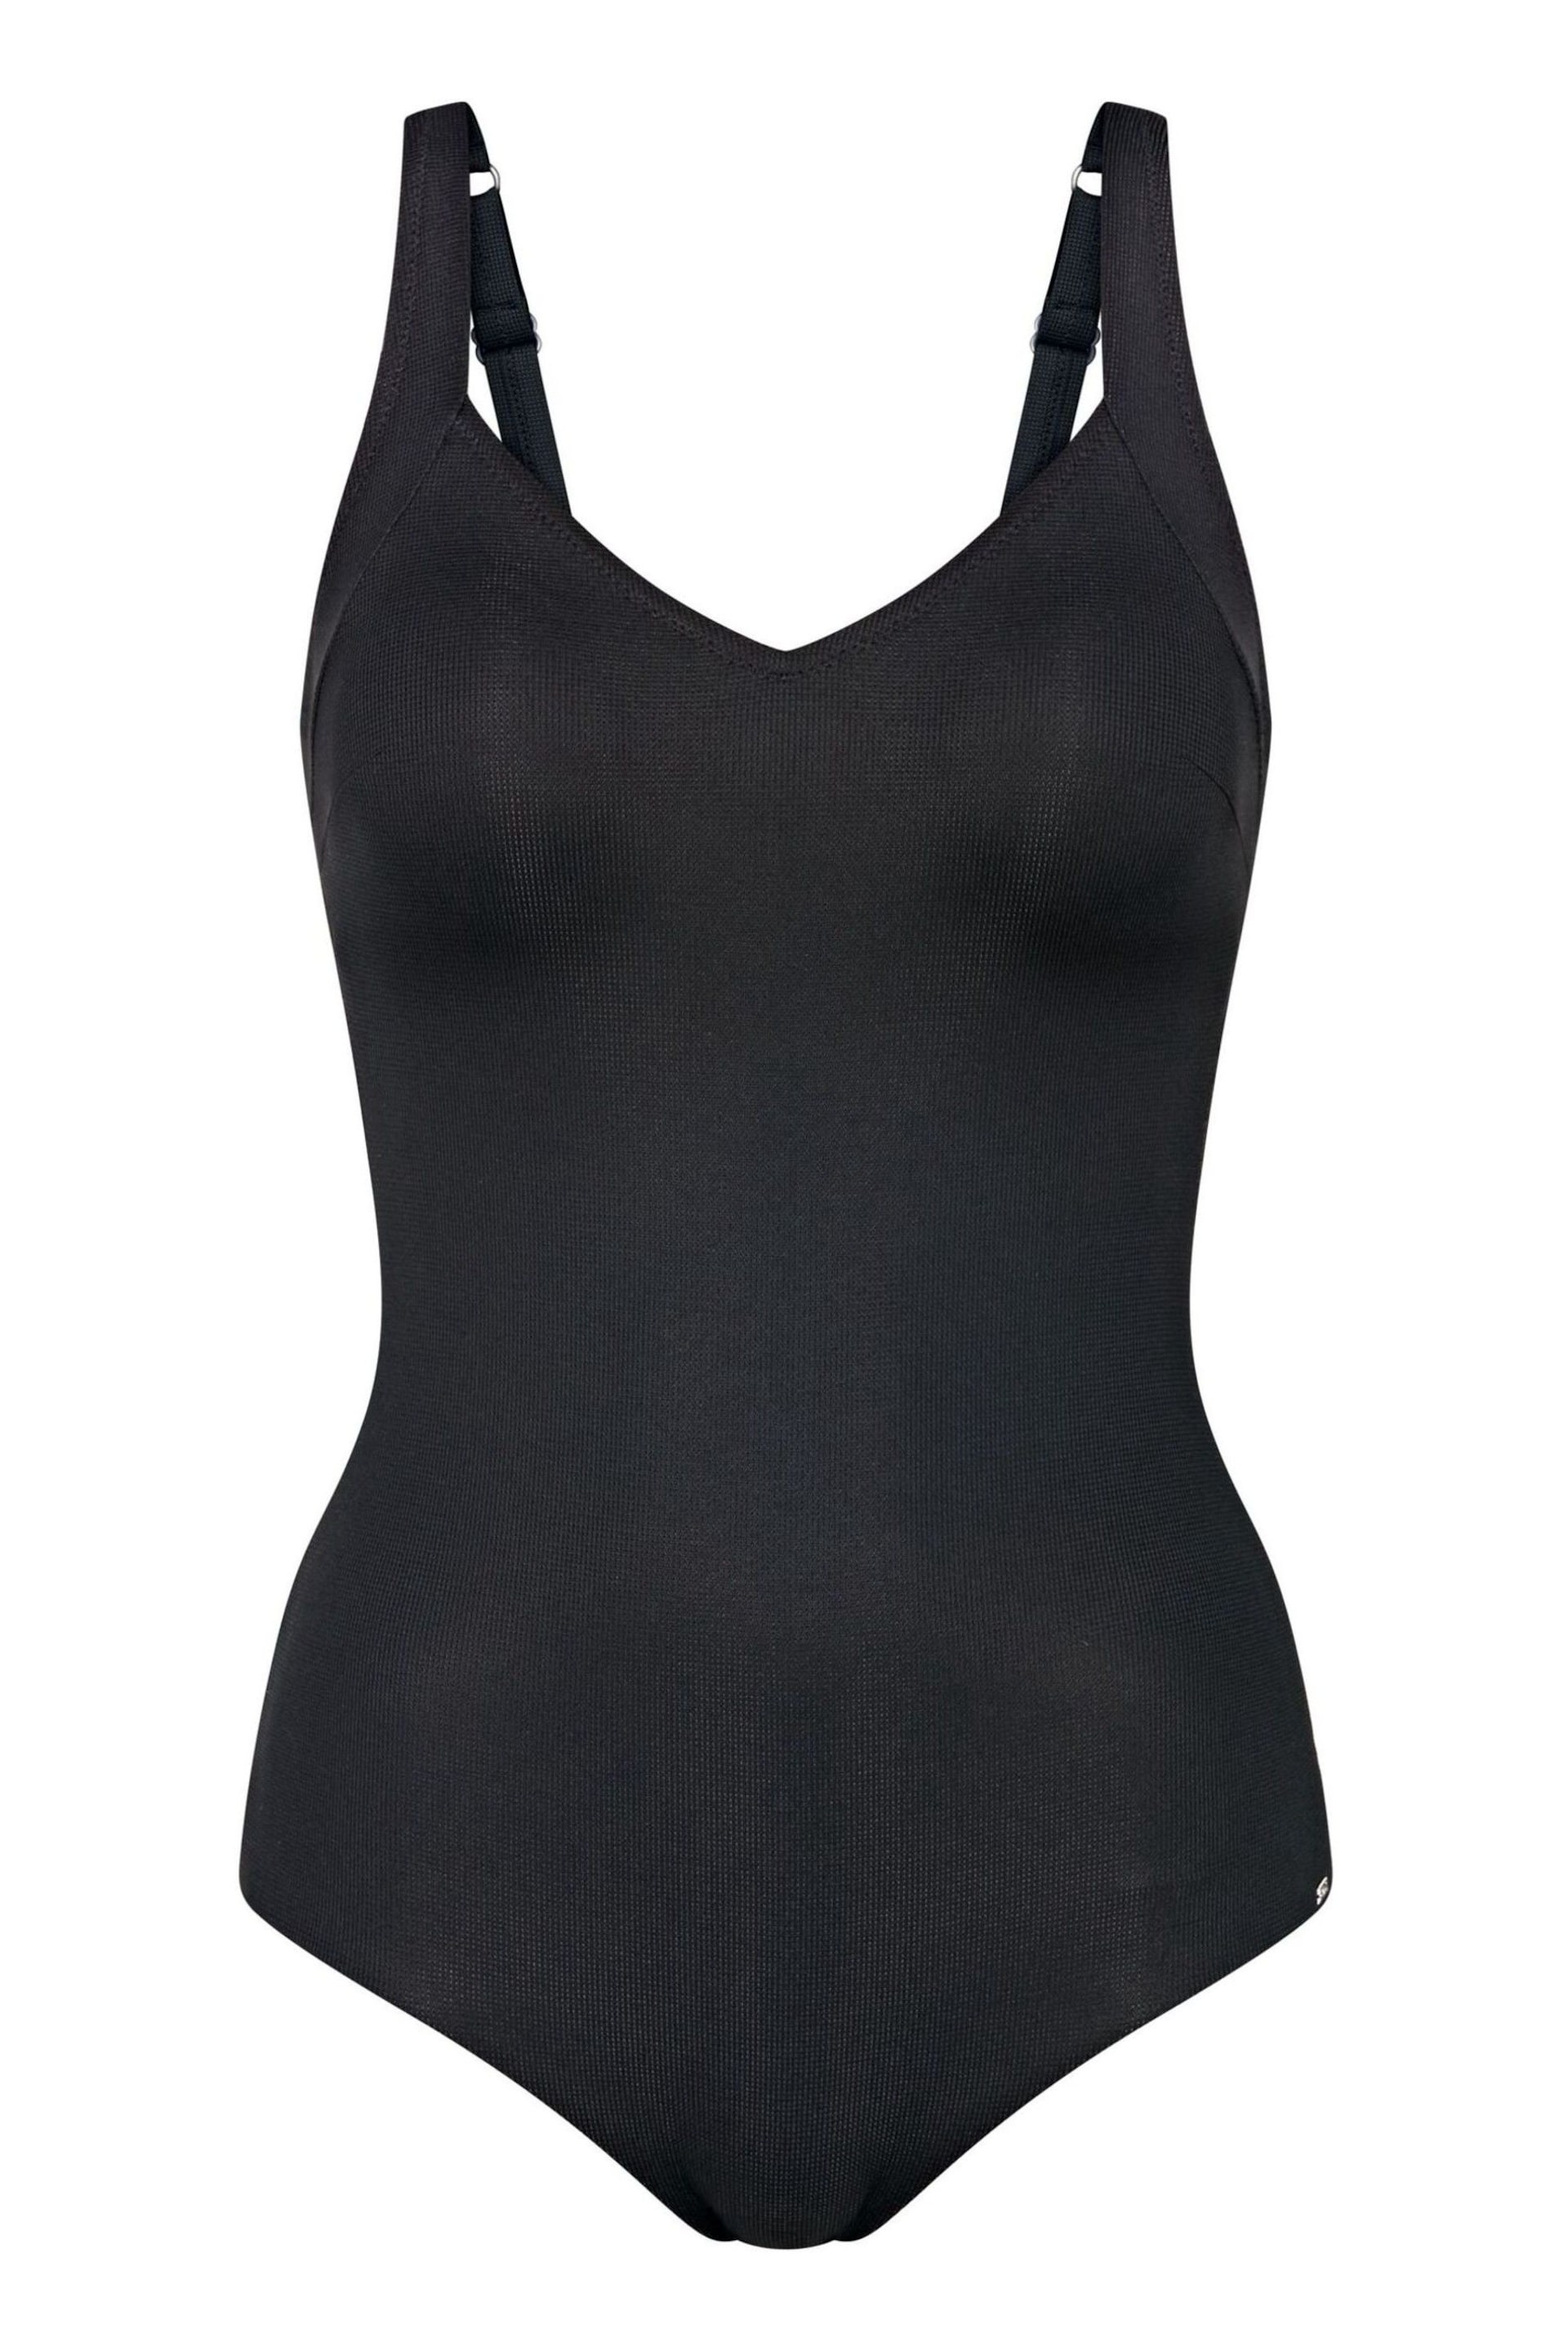 Triumph Summer Glow Padded Black Swimsuit - Image 4 of 4